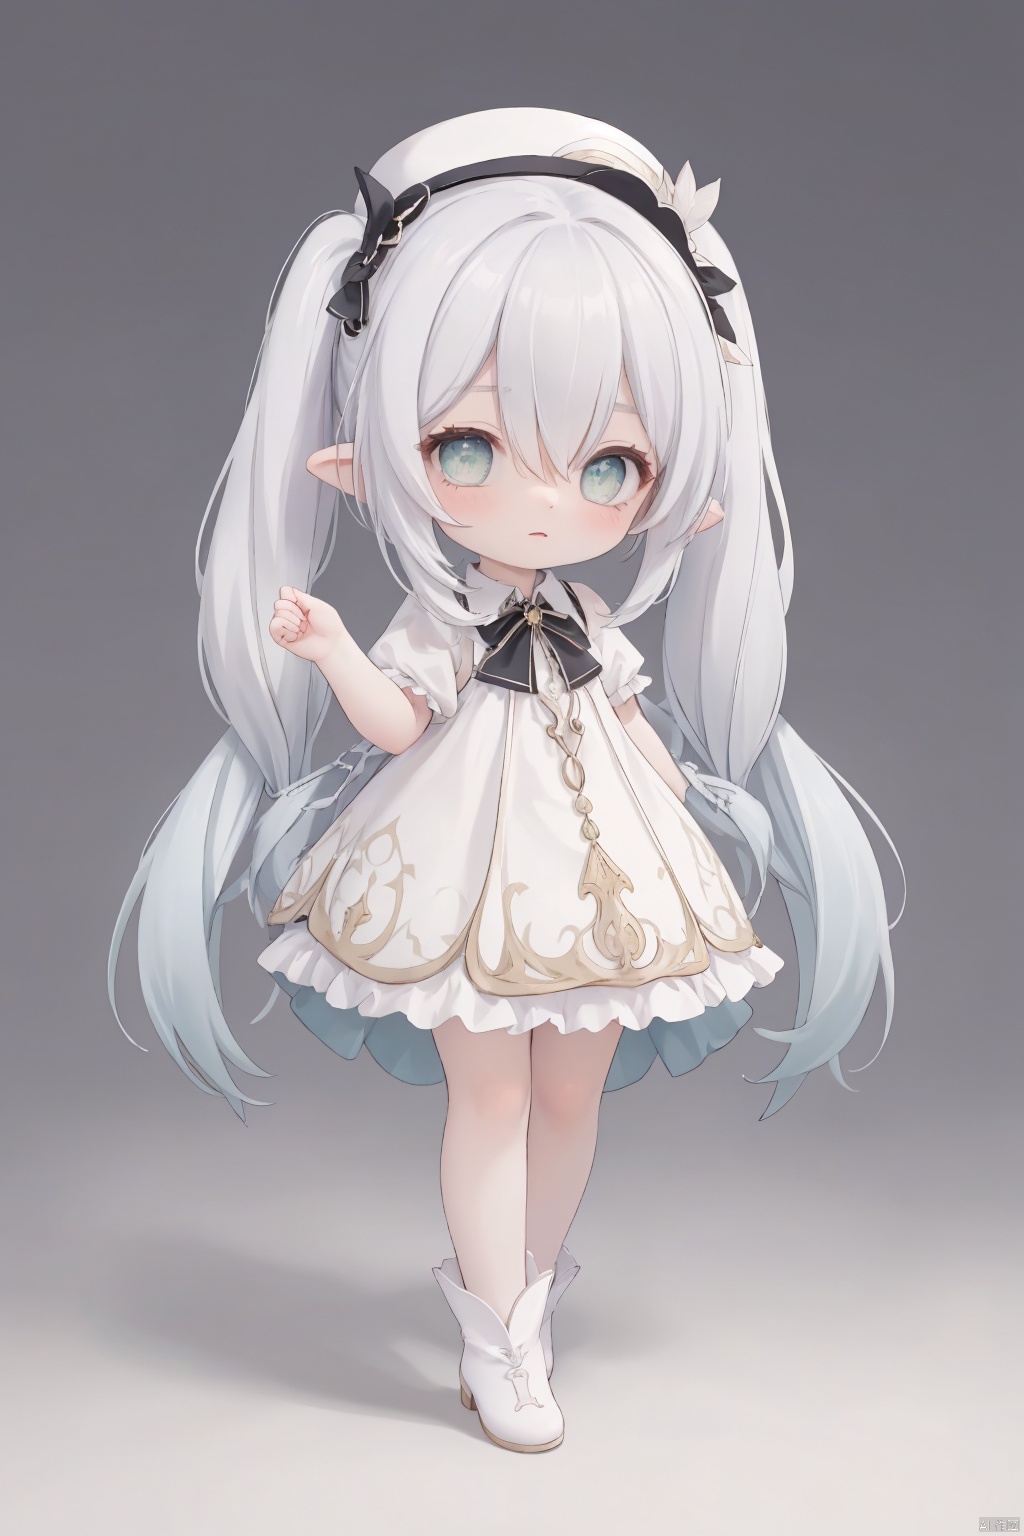  masterpiece,best quality,ultra-detailed,finely detail,highres,UHD,fine details,cinematic,2girl,pale skin,skinny,thin,white hair,gradient hair,mullet,twin braids,(hair over one eye),very long hair,two ,no sclera,upturned eyes,shy,makeup,symmetrical body,correct facial features,looking at viewer,full dress,evening gown,frilled shirt,mini top hat,hat bow,gothic lolita,lace,socks,high heel boots,clean background,the low-purity tone,gothic,volumetric light,cold light,symmetrical the composition,C4d,3D rendering,clay material,chibi,character design,Gothic gloomy,retro dark vintage Jellyfish character image